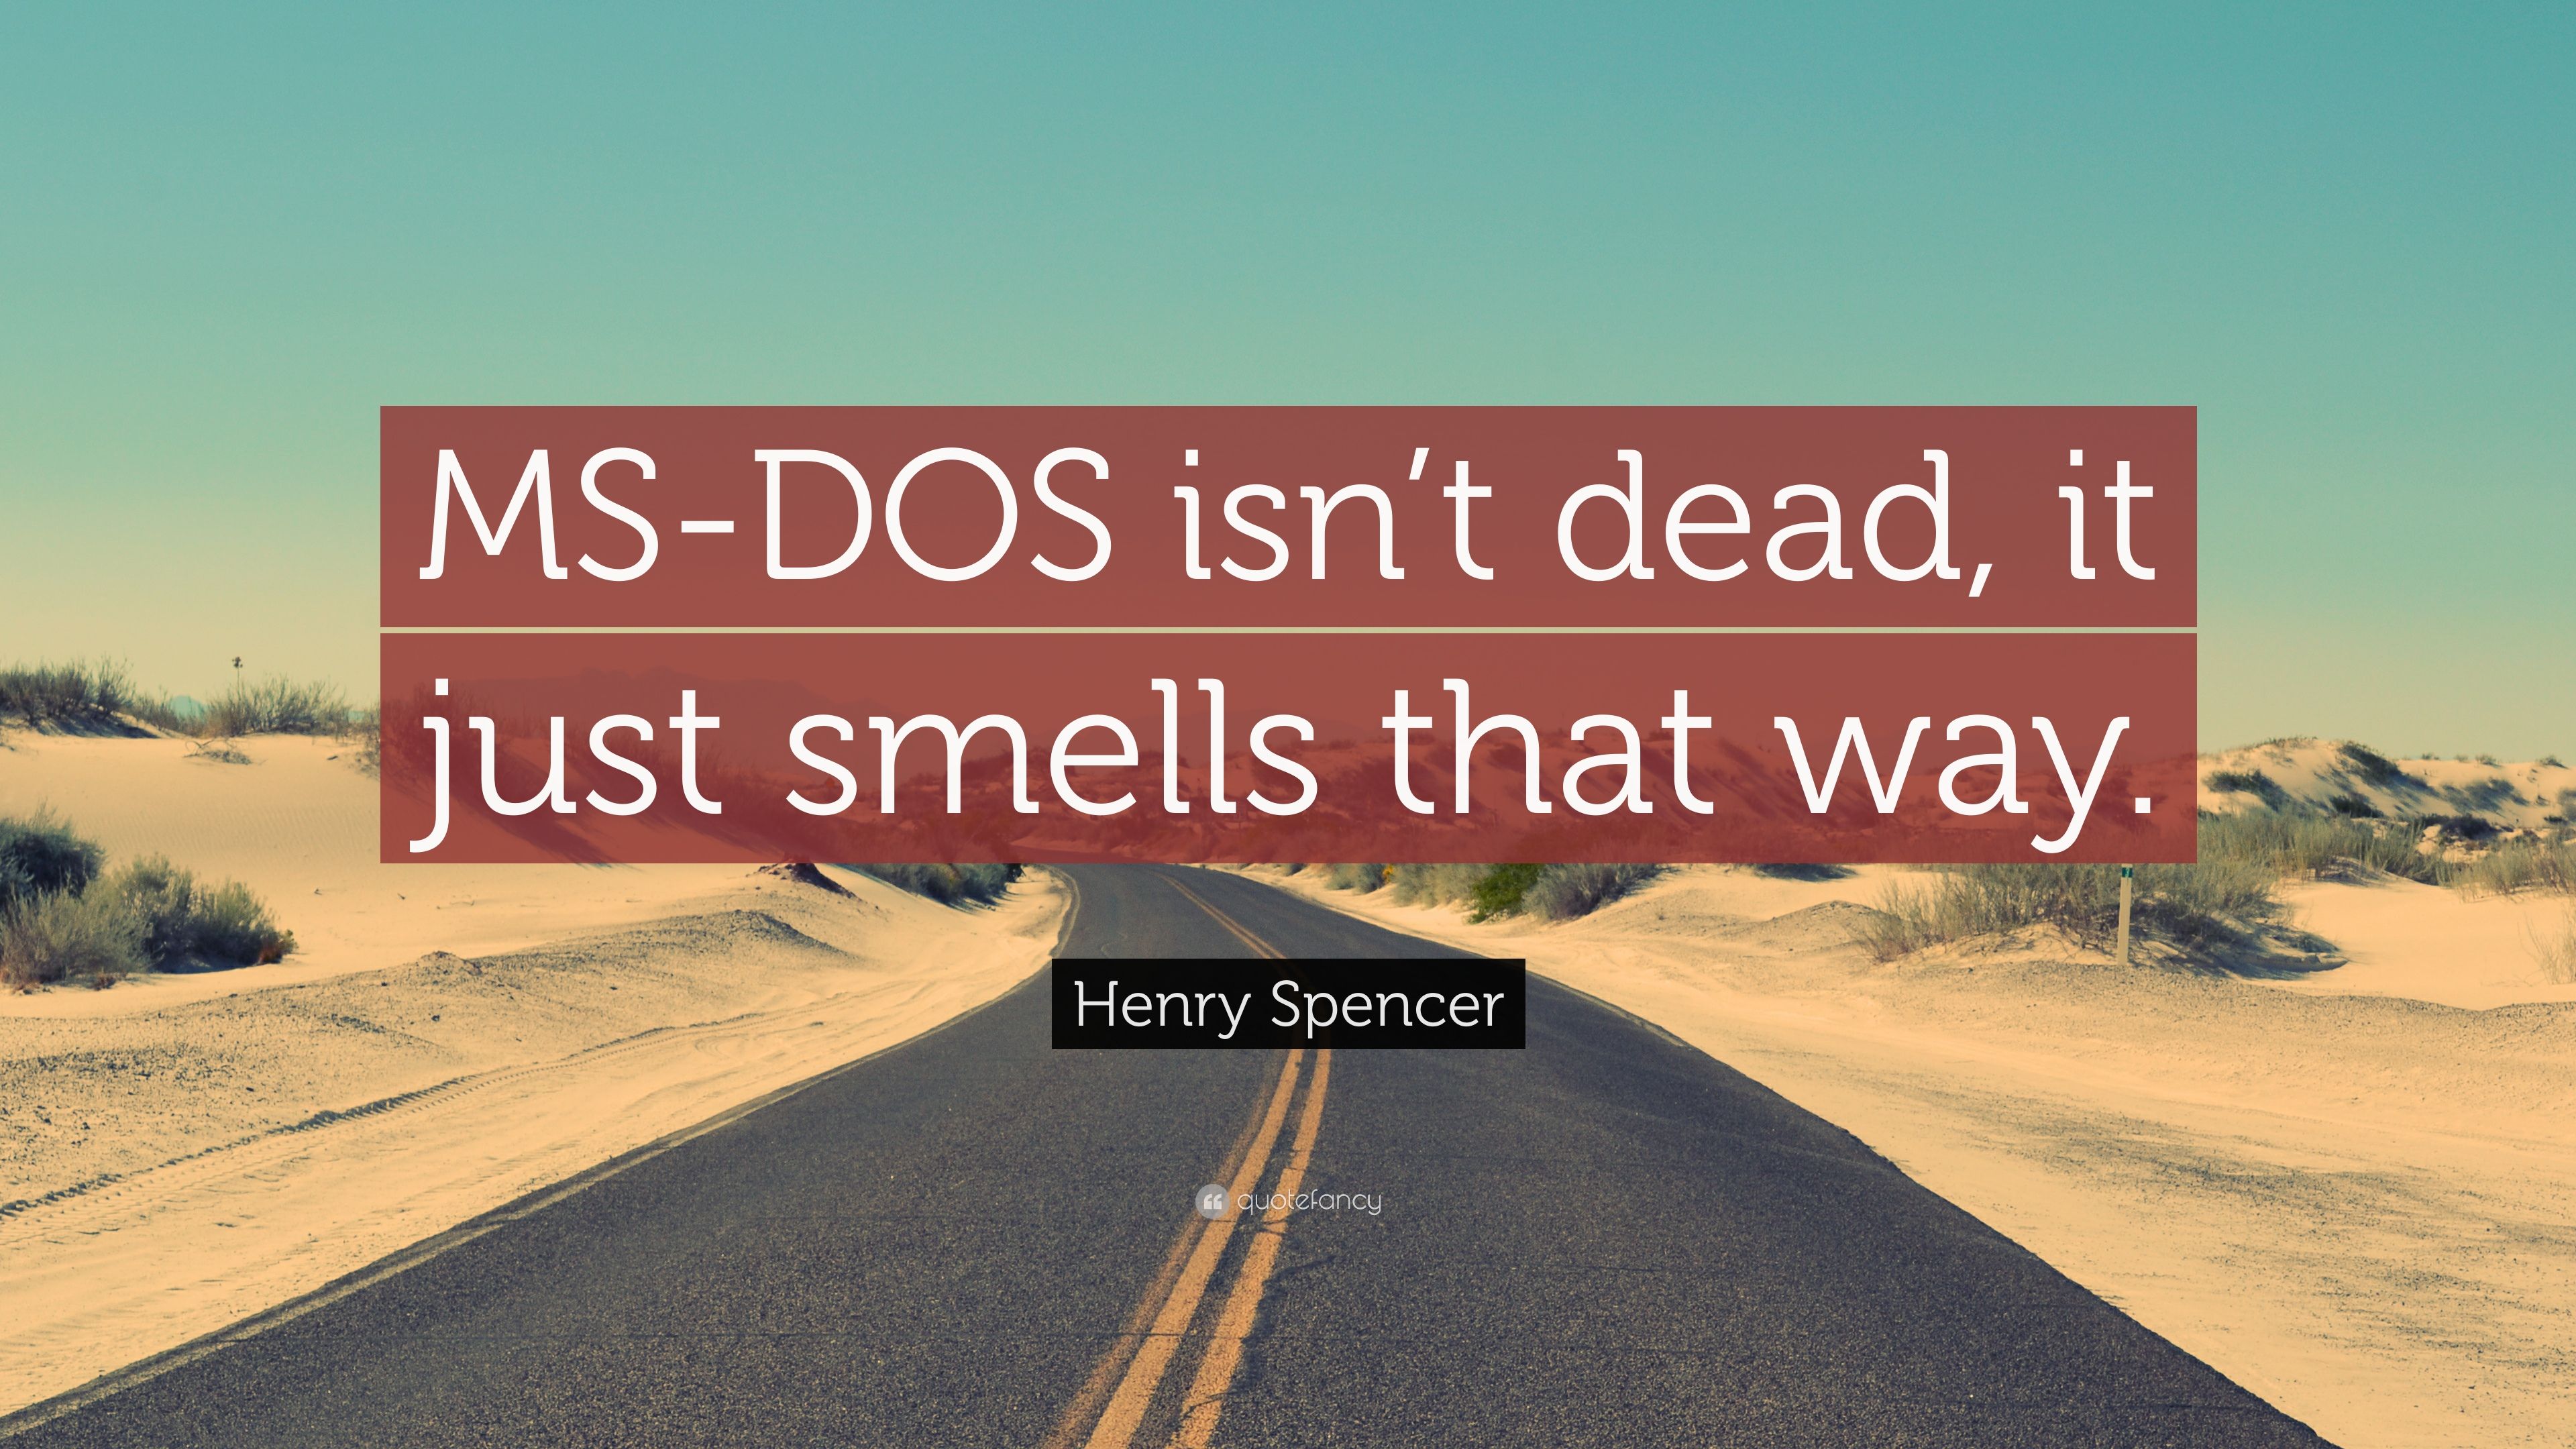 Henry Spencer Quote: “MS DOS Isn't Dead, It Just Smells That Way.” (7 Wallpaper)